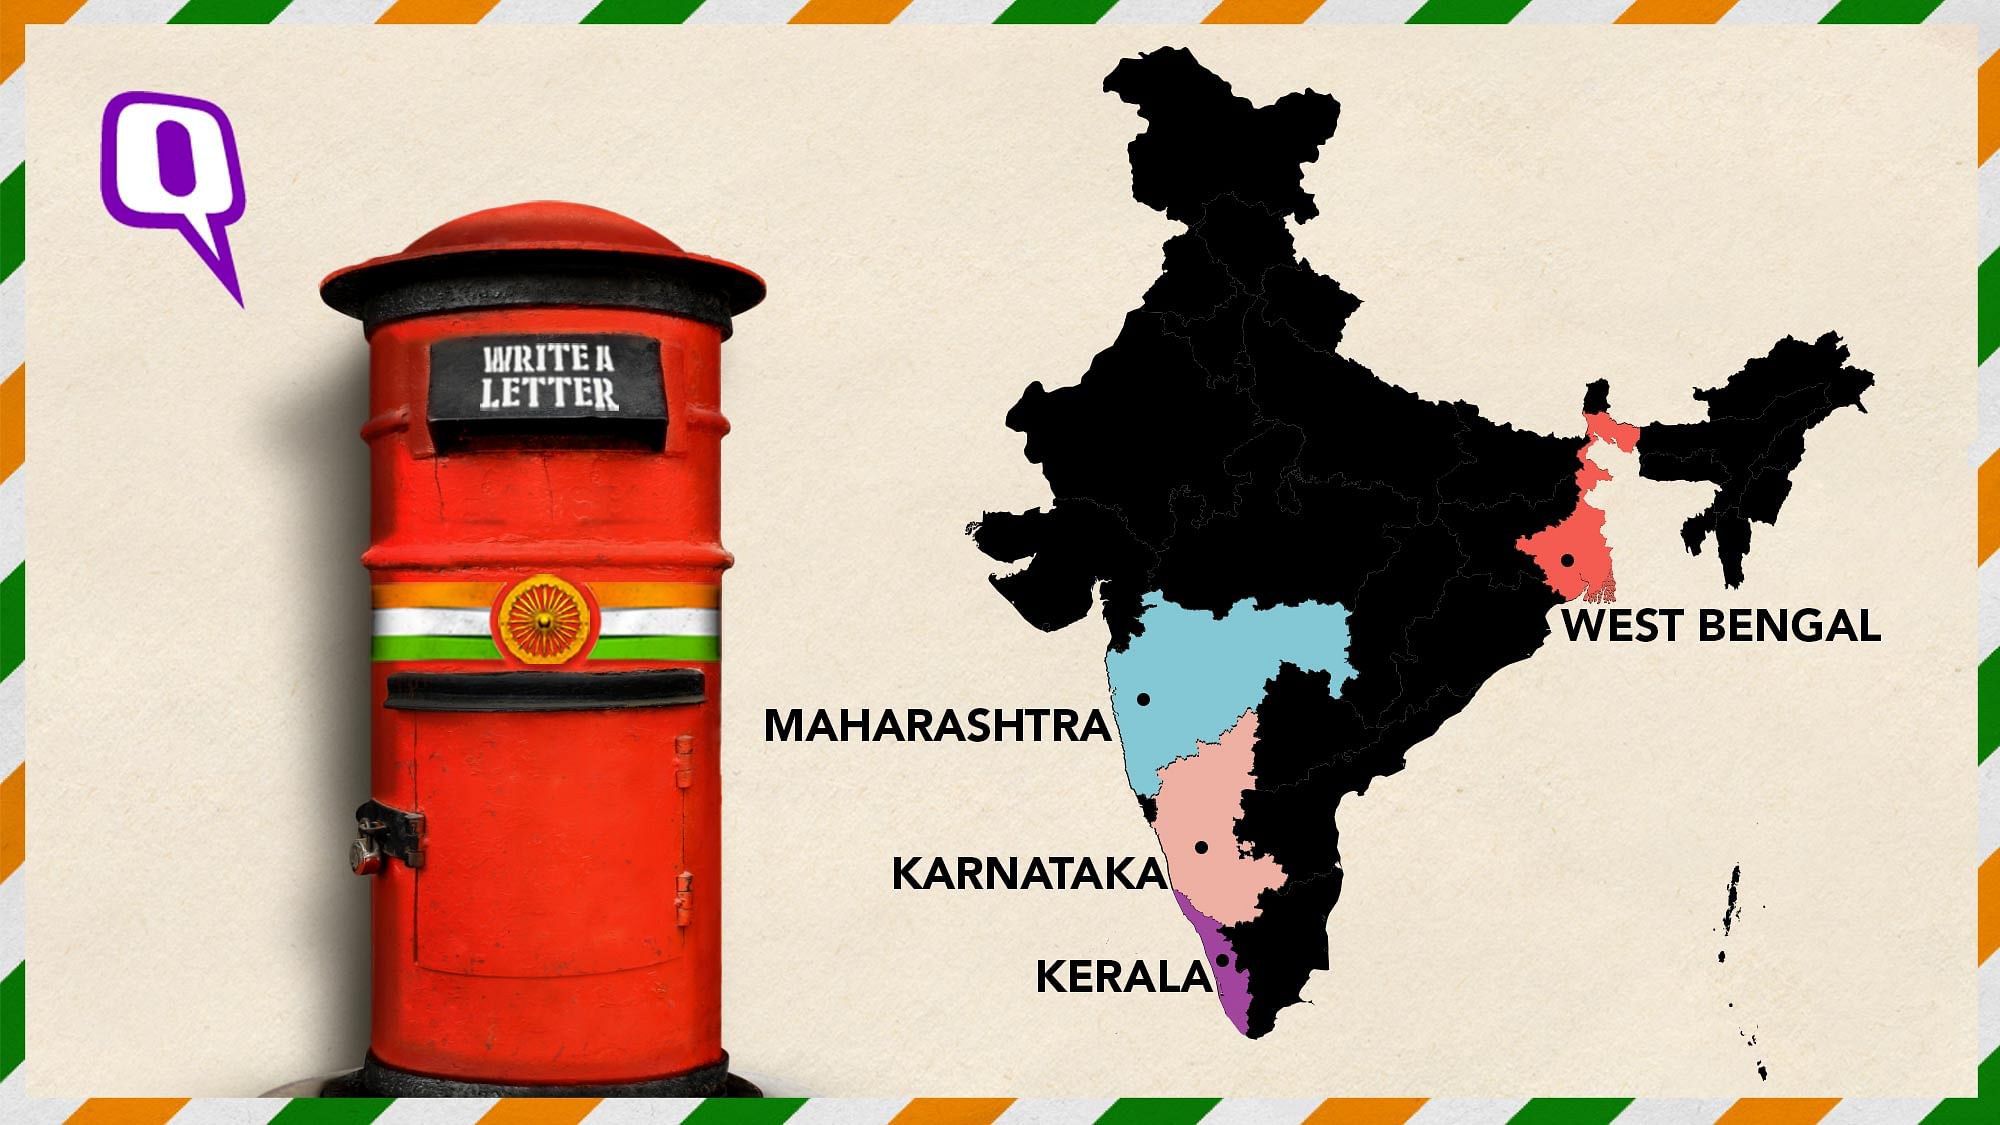 Citizens from across the nation write their letter to India for Republic Day 2020.&nbsp;